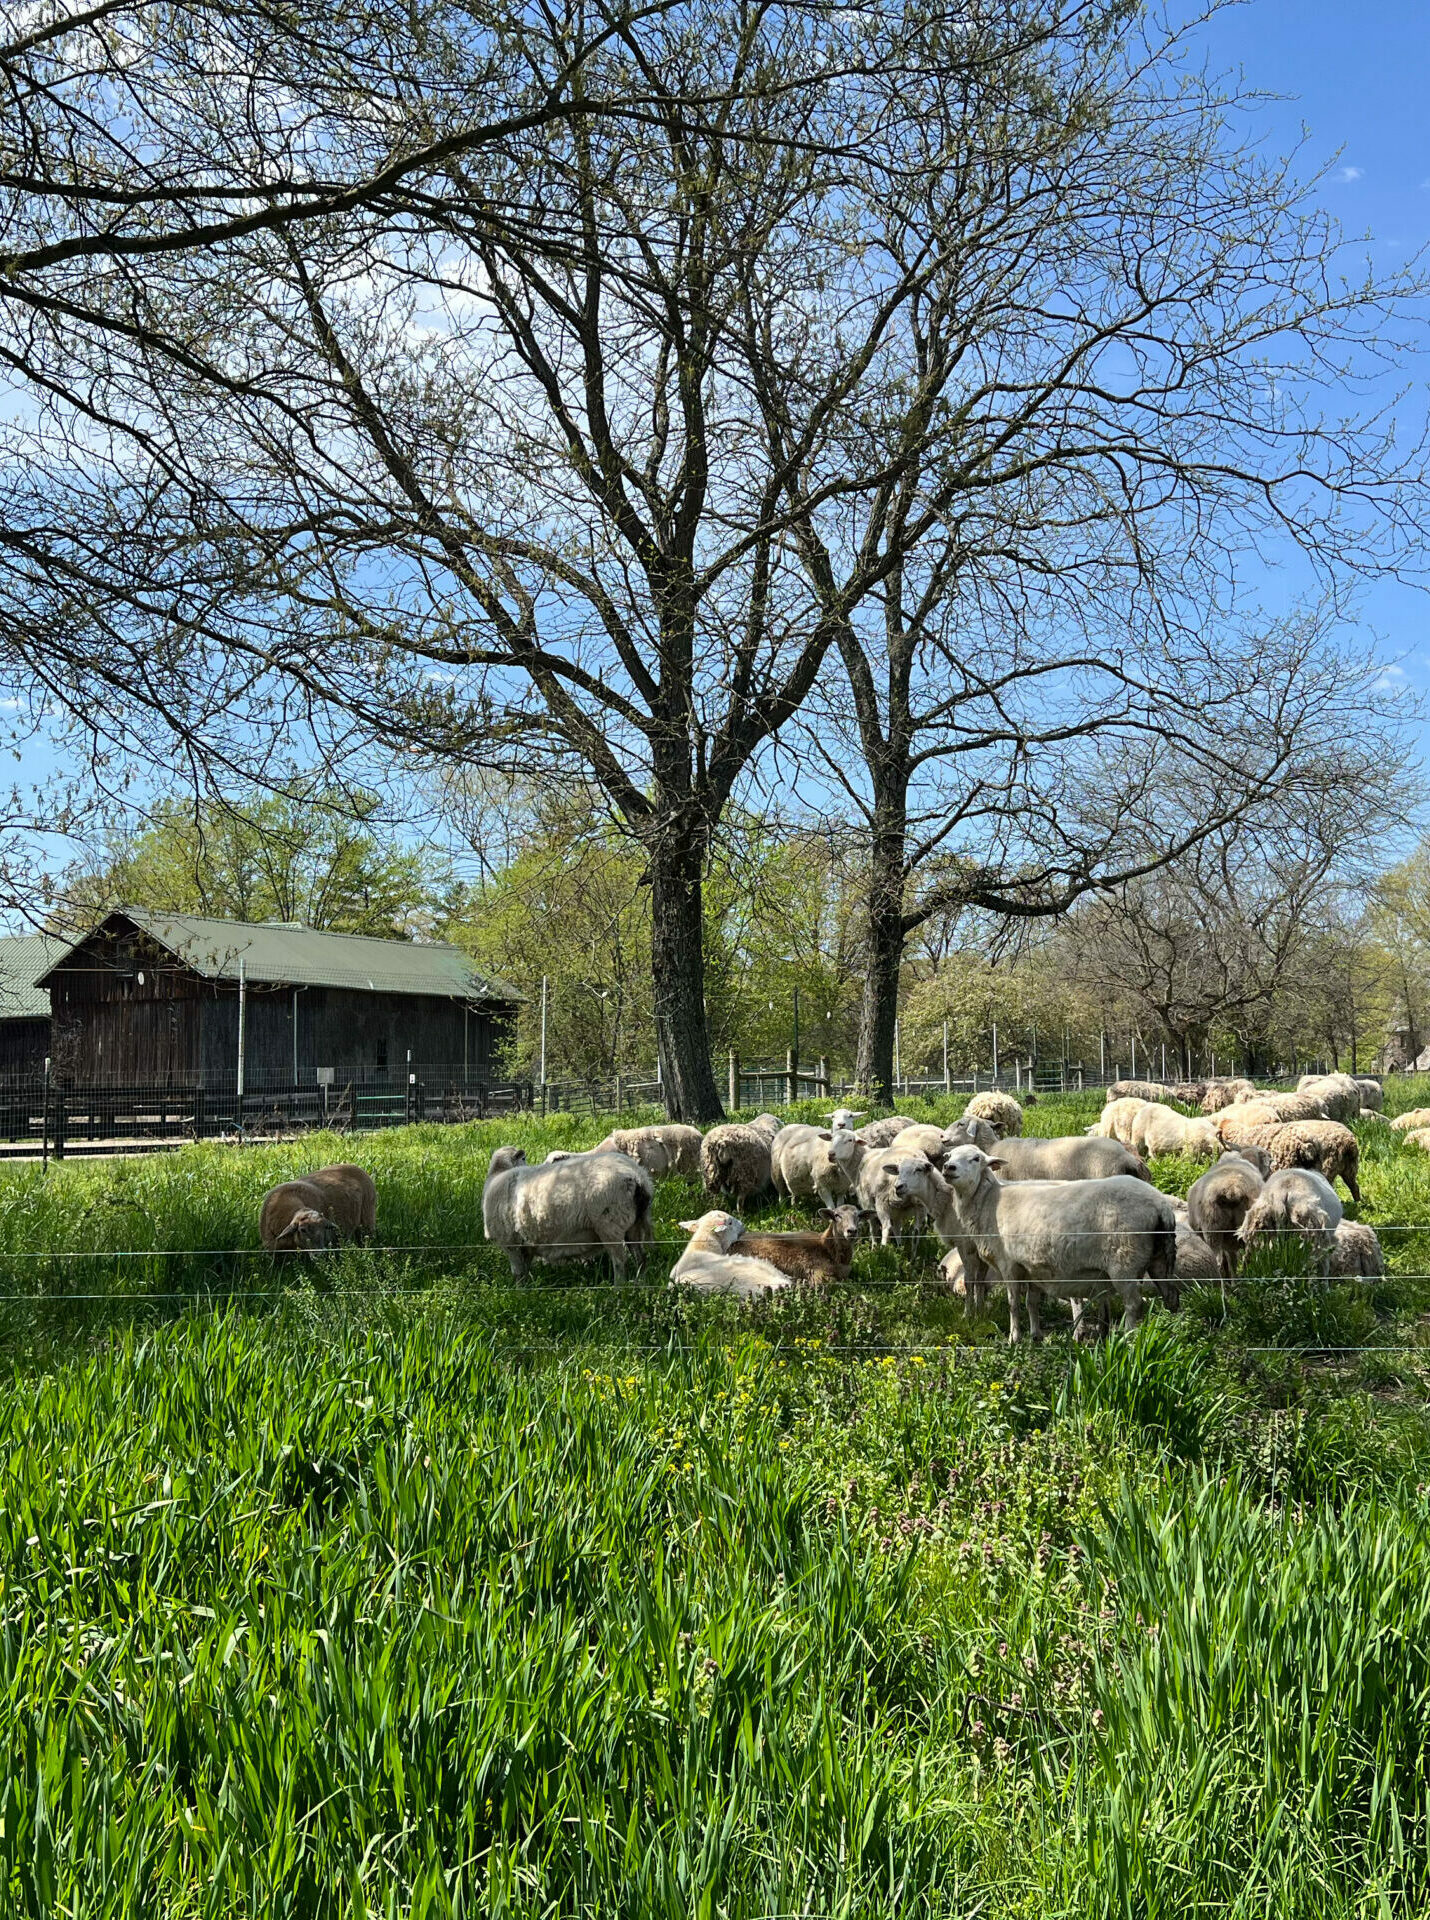 sheep grazing in Ley Field pasture with trees and wooden barn in background